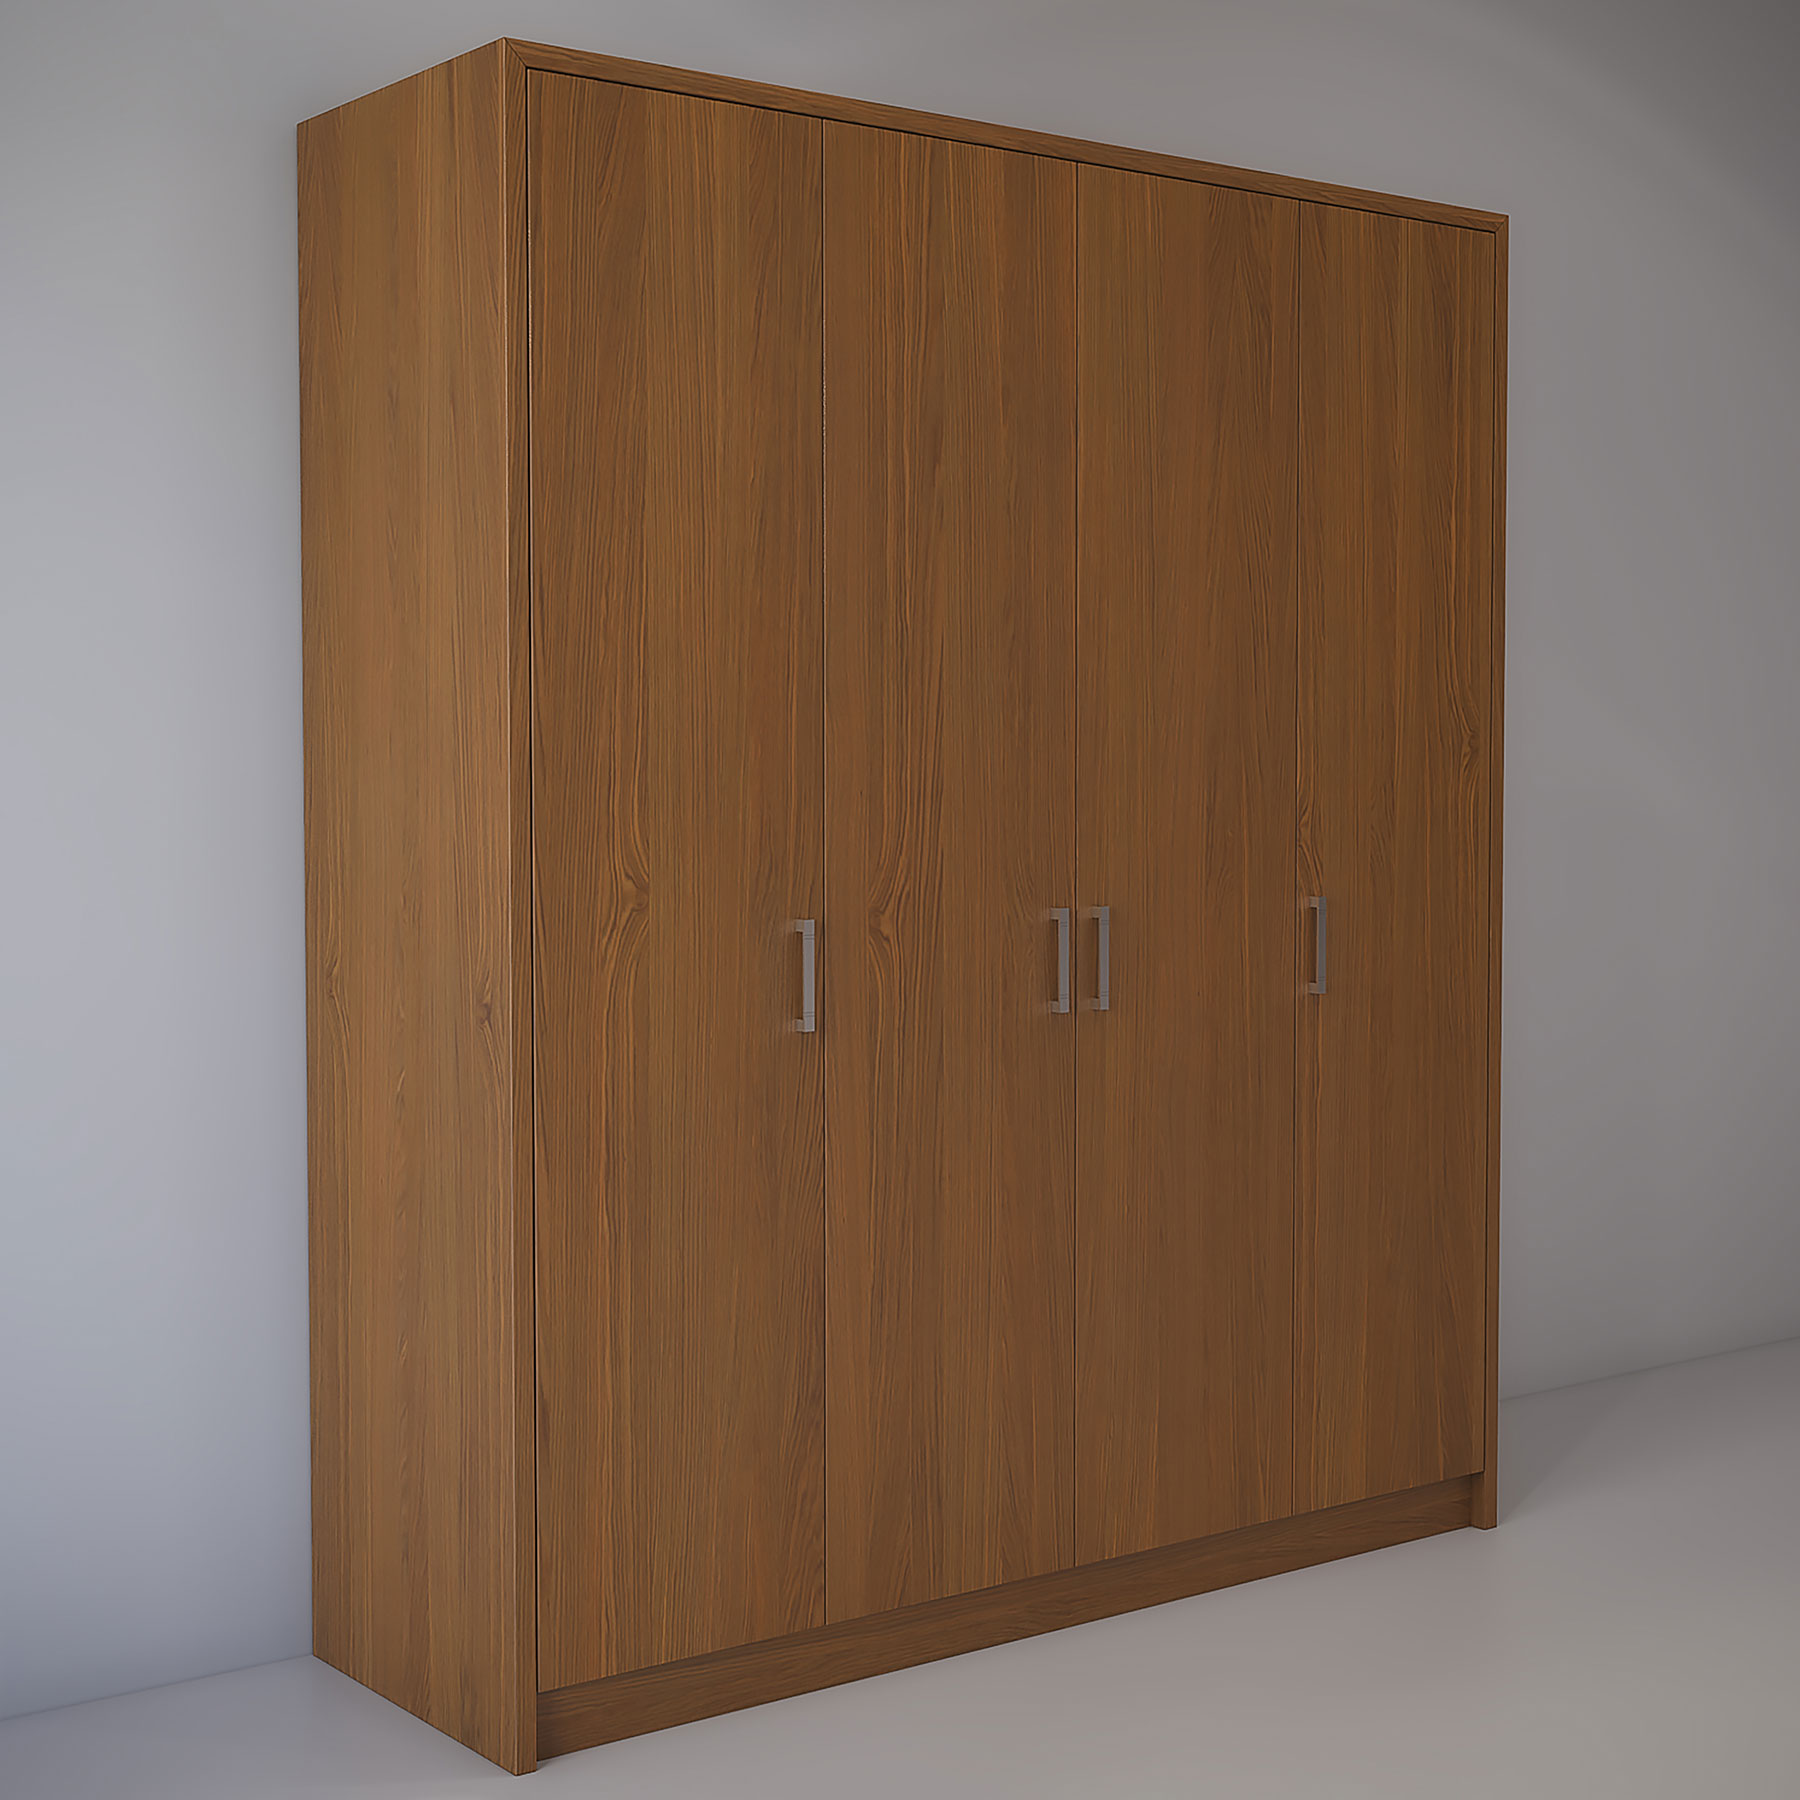 A four-door wardrobe from the Verona collection